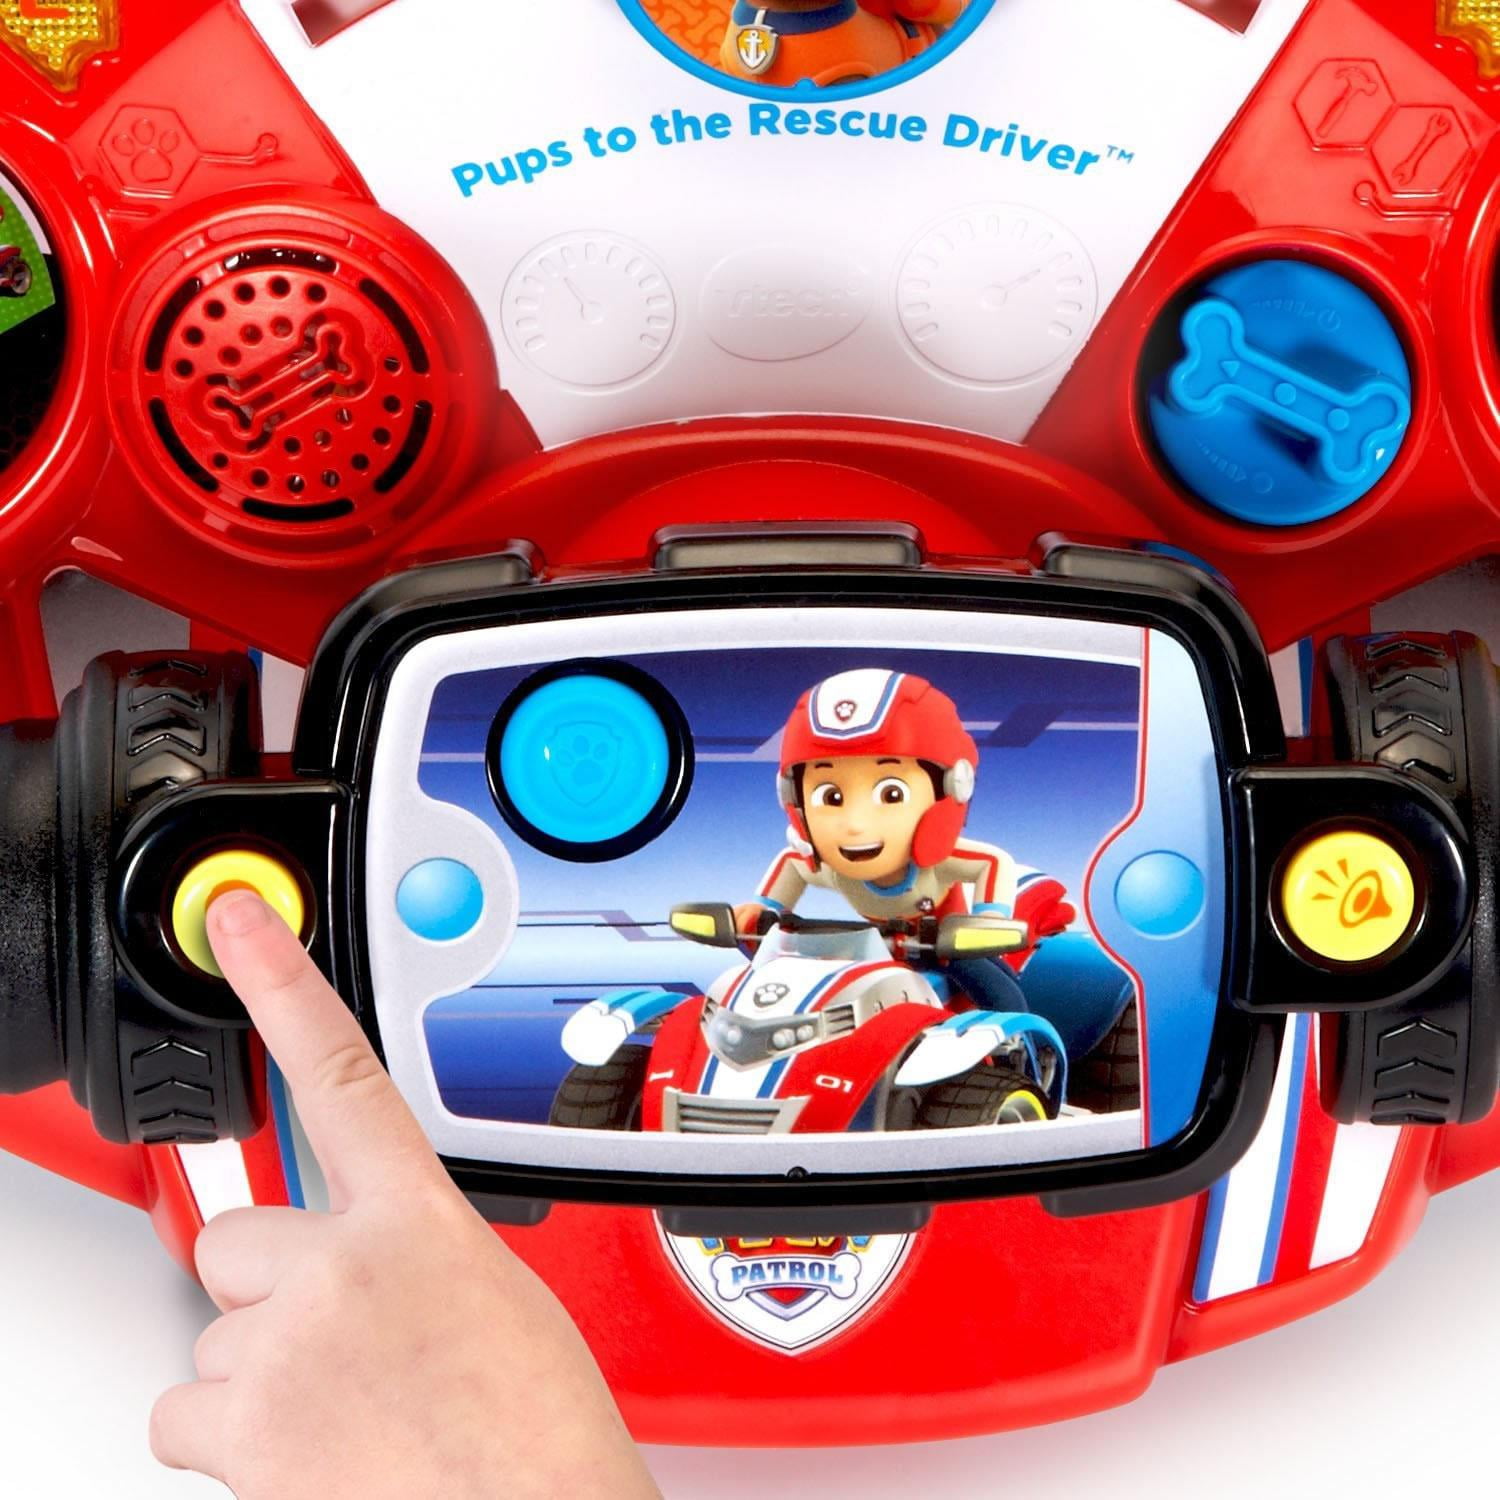 Paw Patrol Pups to Rescue Driver 3-in-1 ATV Nickelodeon Vtech 80190200 - Walmart.com